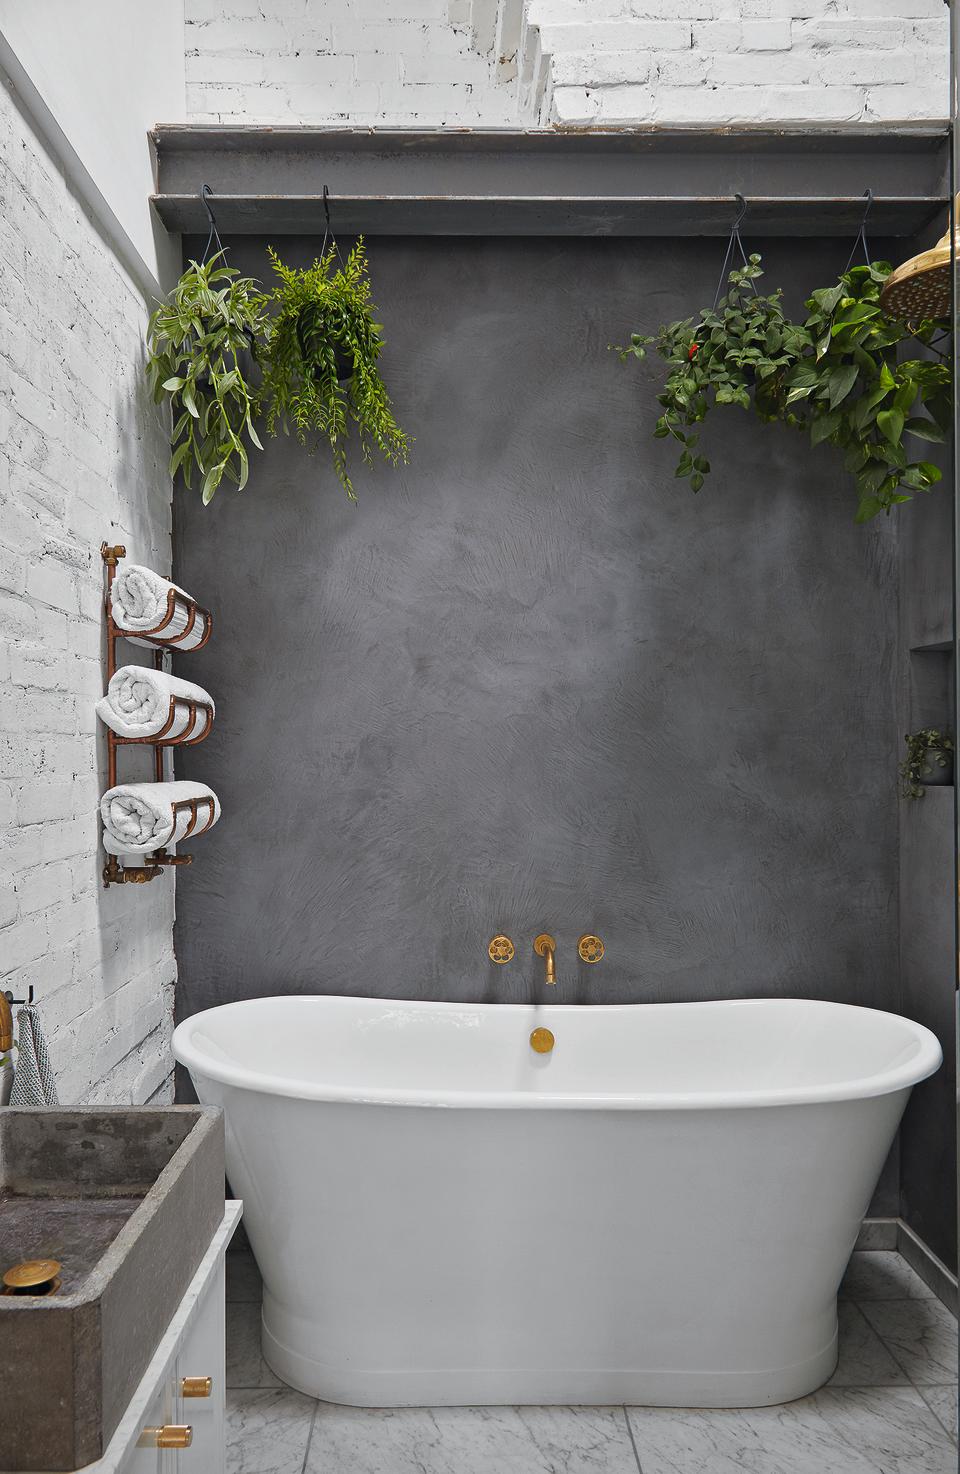 A bathroom with a gray limewash wall, a large bath, and rolled towels in a holder